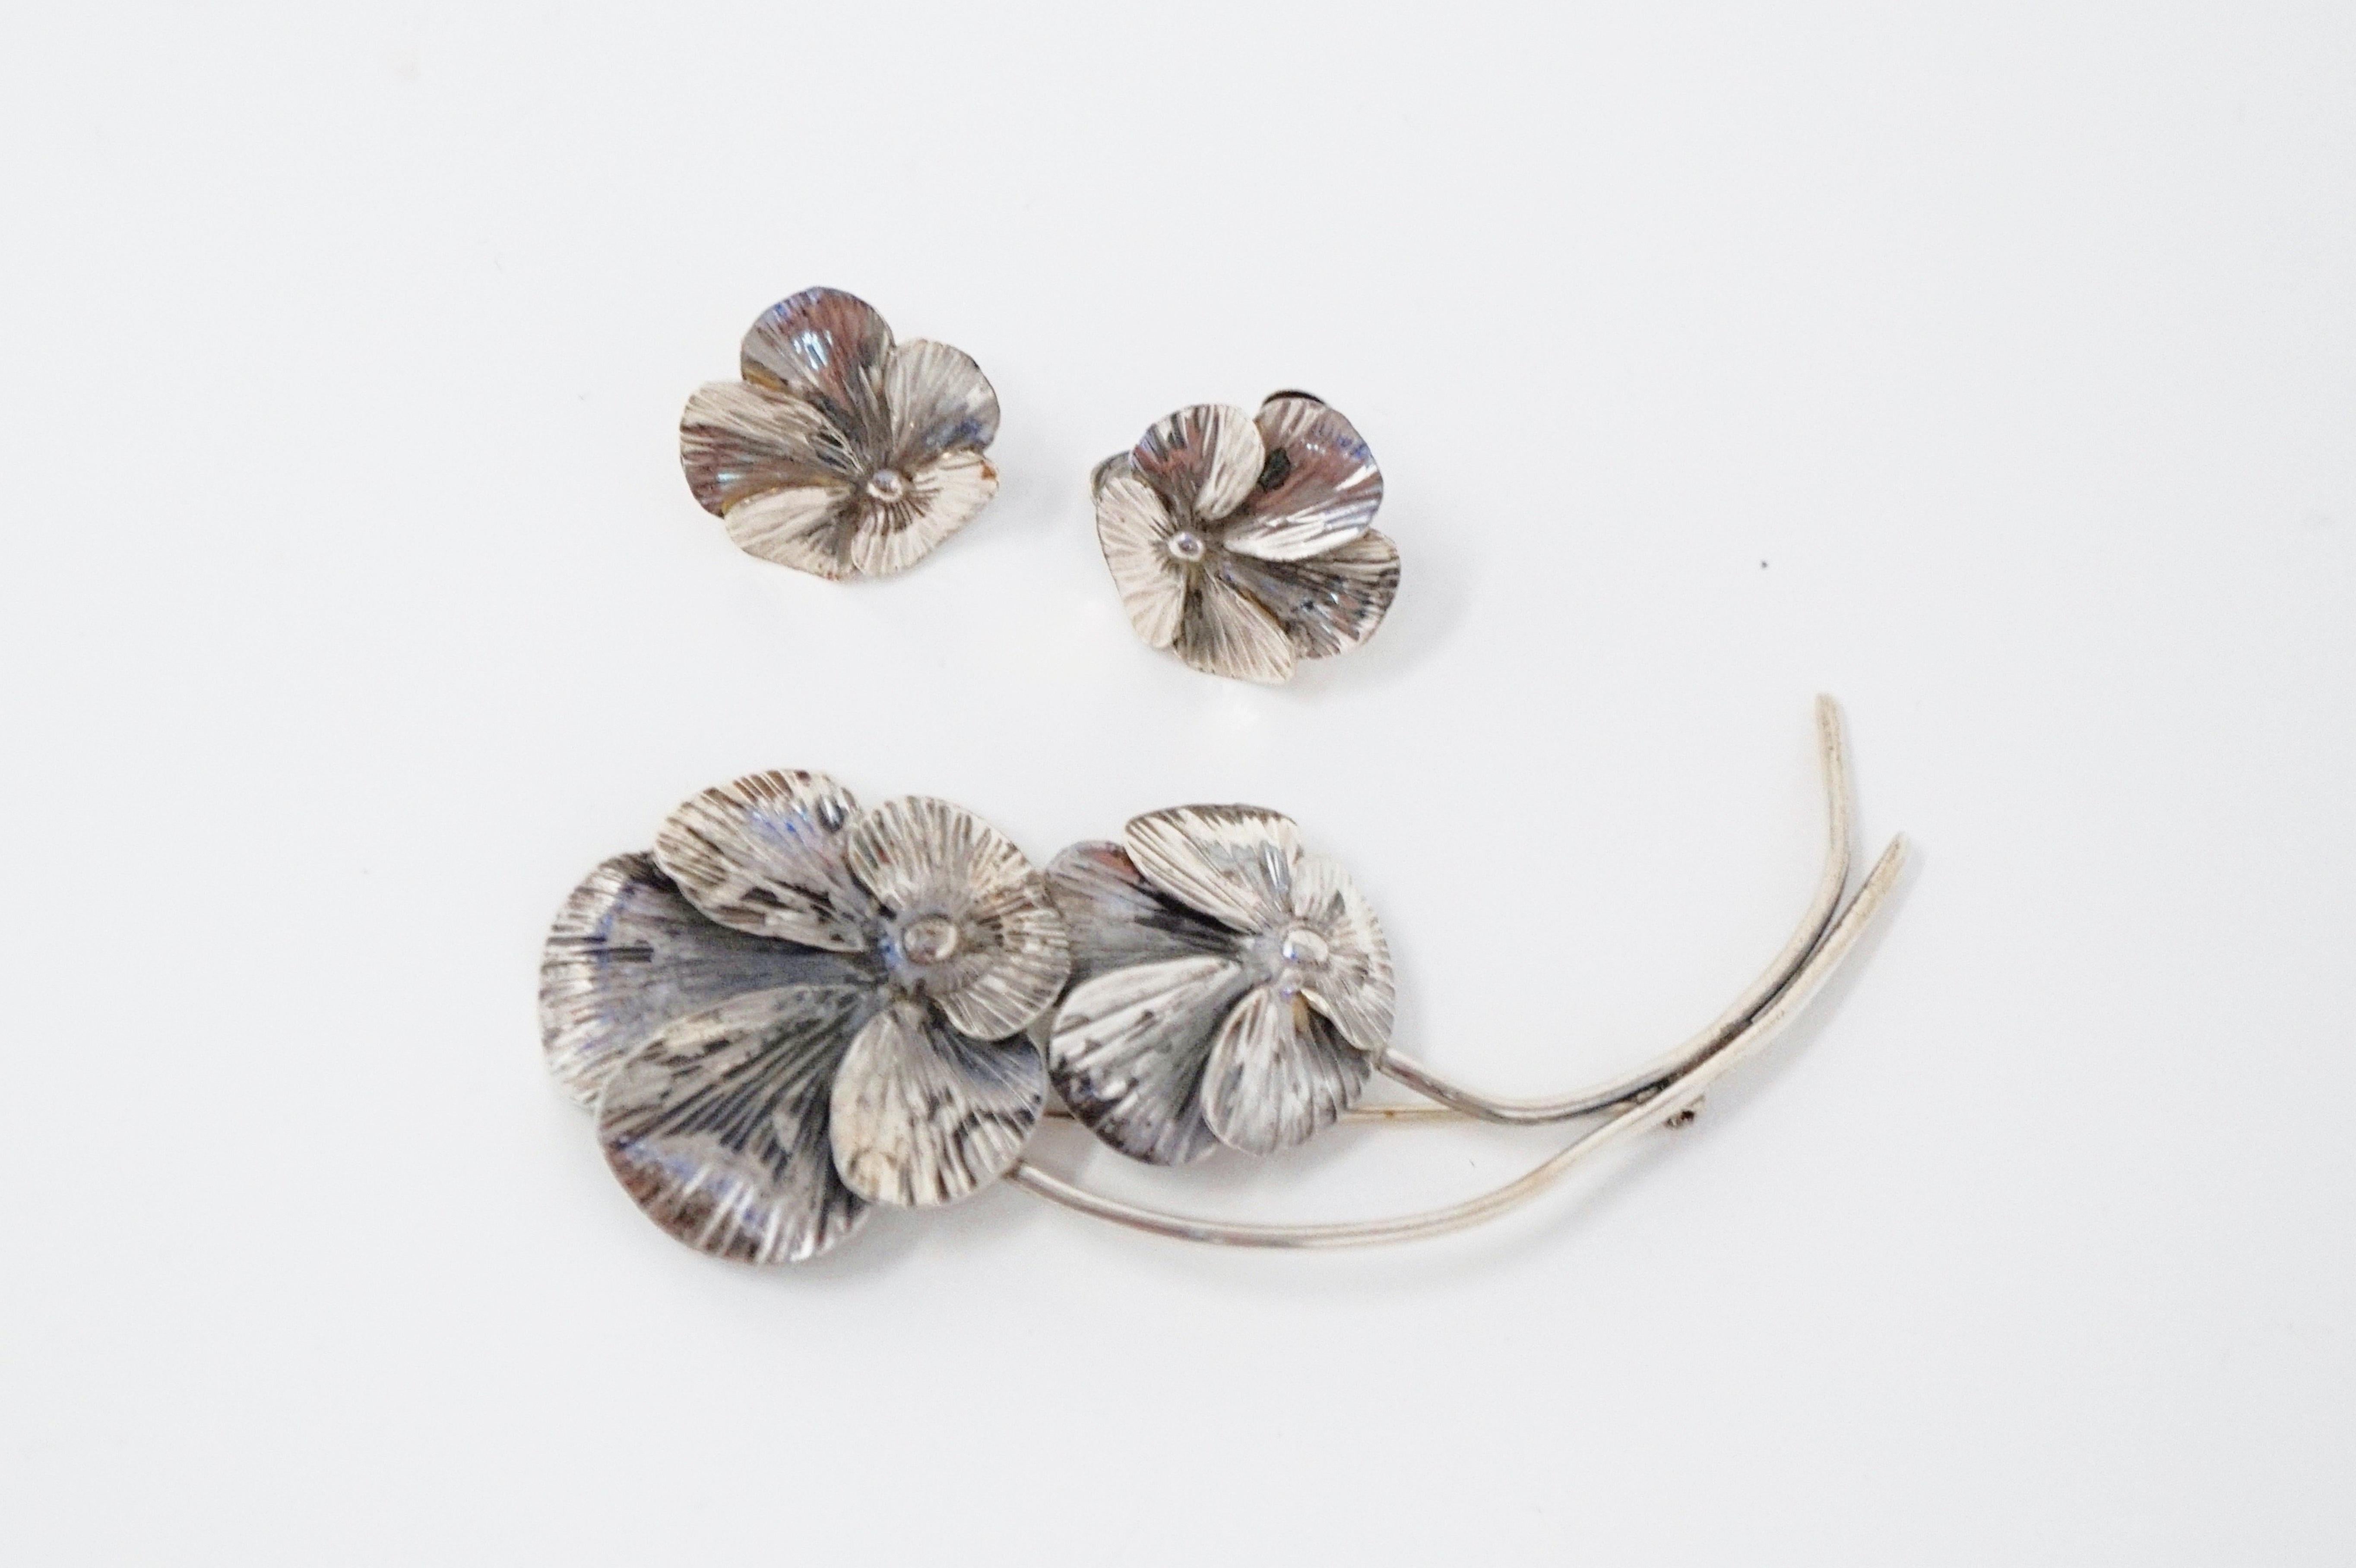 This beautiful sterling silver Pansy flower demi-parure brooch and clip-on earring set was handmade by artisan Stuart Nye, circa 1940s.  This particular pansy design was patented by Stuart Nye on September 17, 1940 (see photos) and that patent